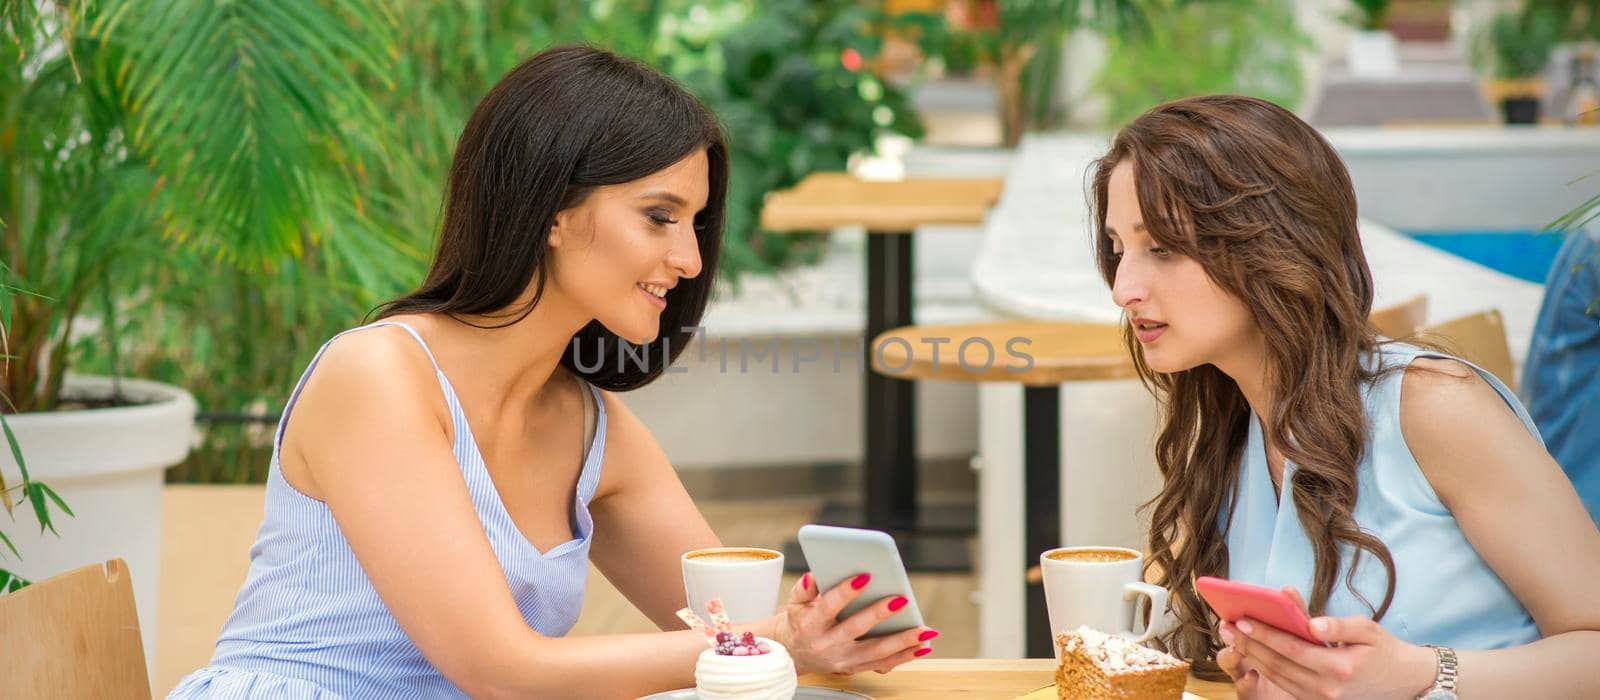 Two beautiful young women together watching something on the phone at the table in a cafe